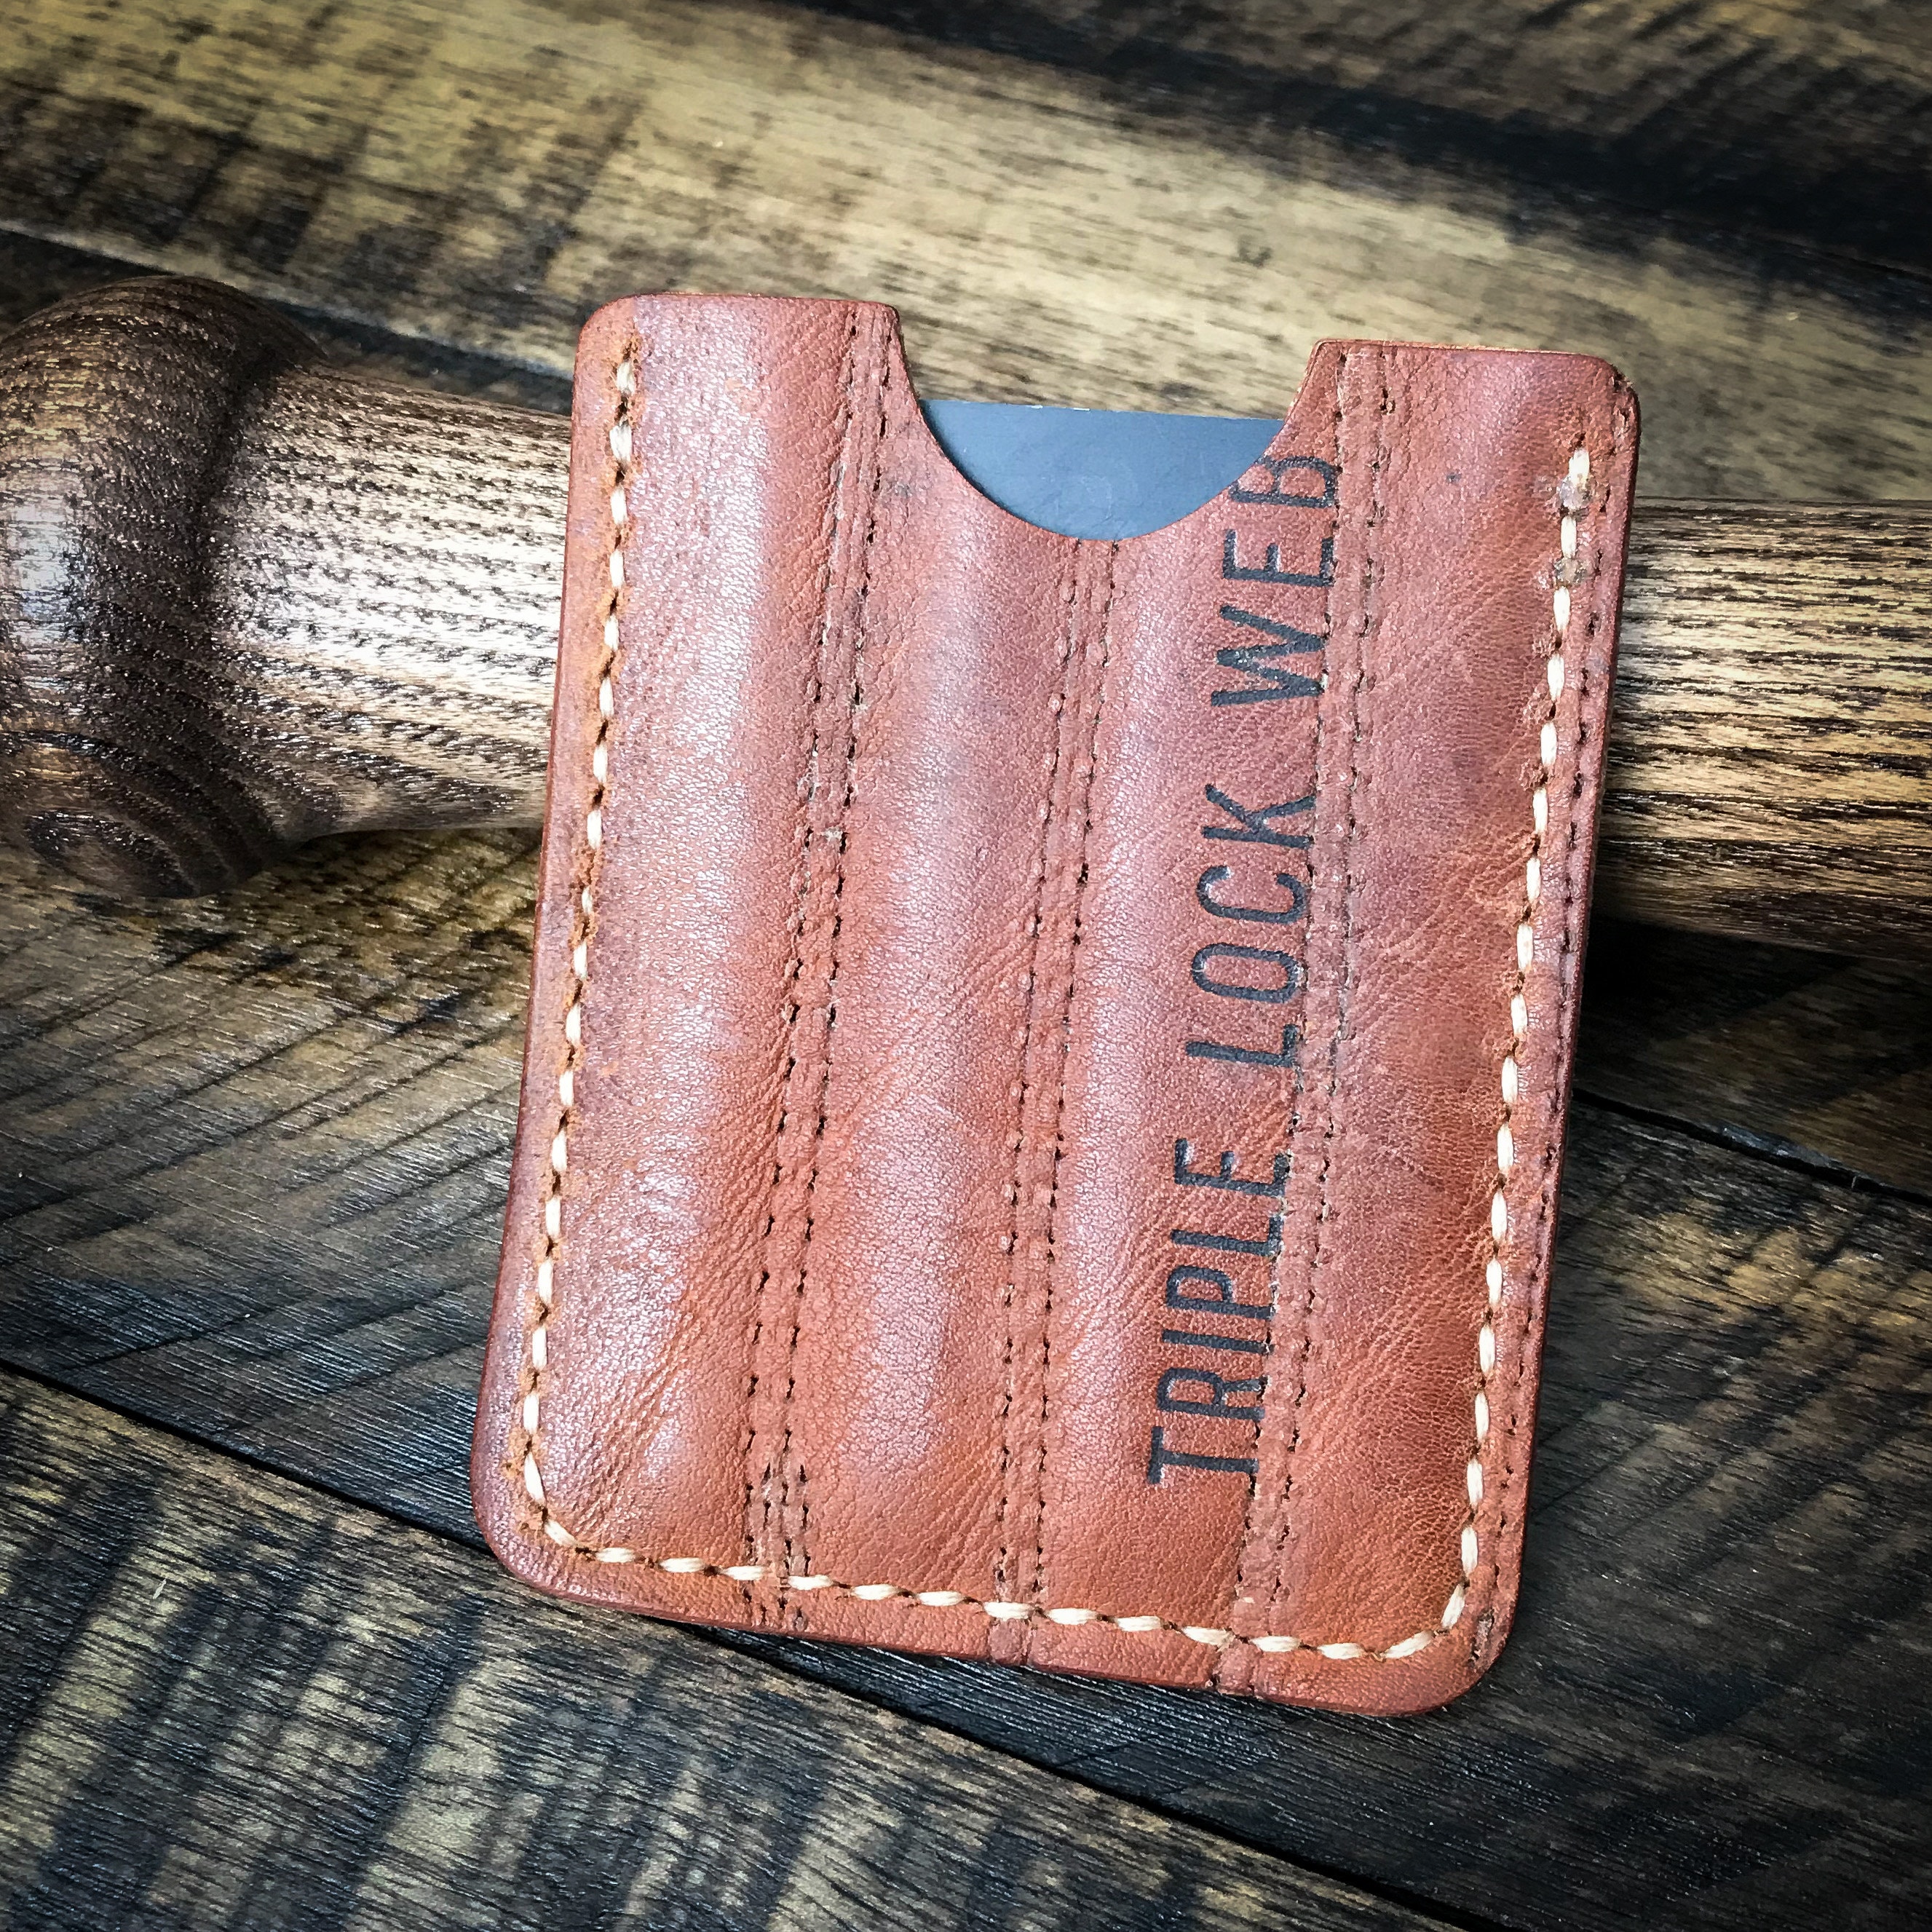 Authentic Repurposed Wallet Brown - $50 (44% Off Retail) - From Emalee